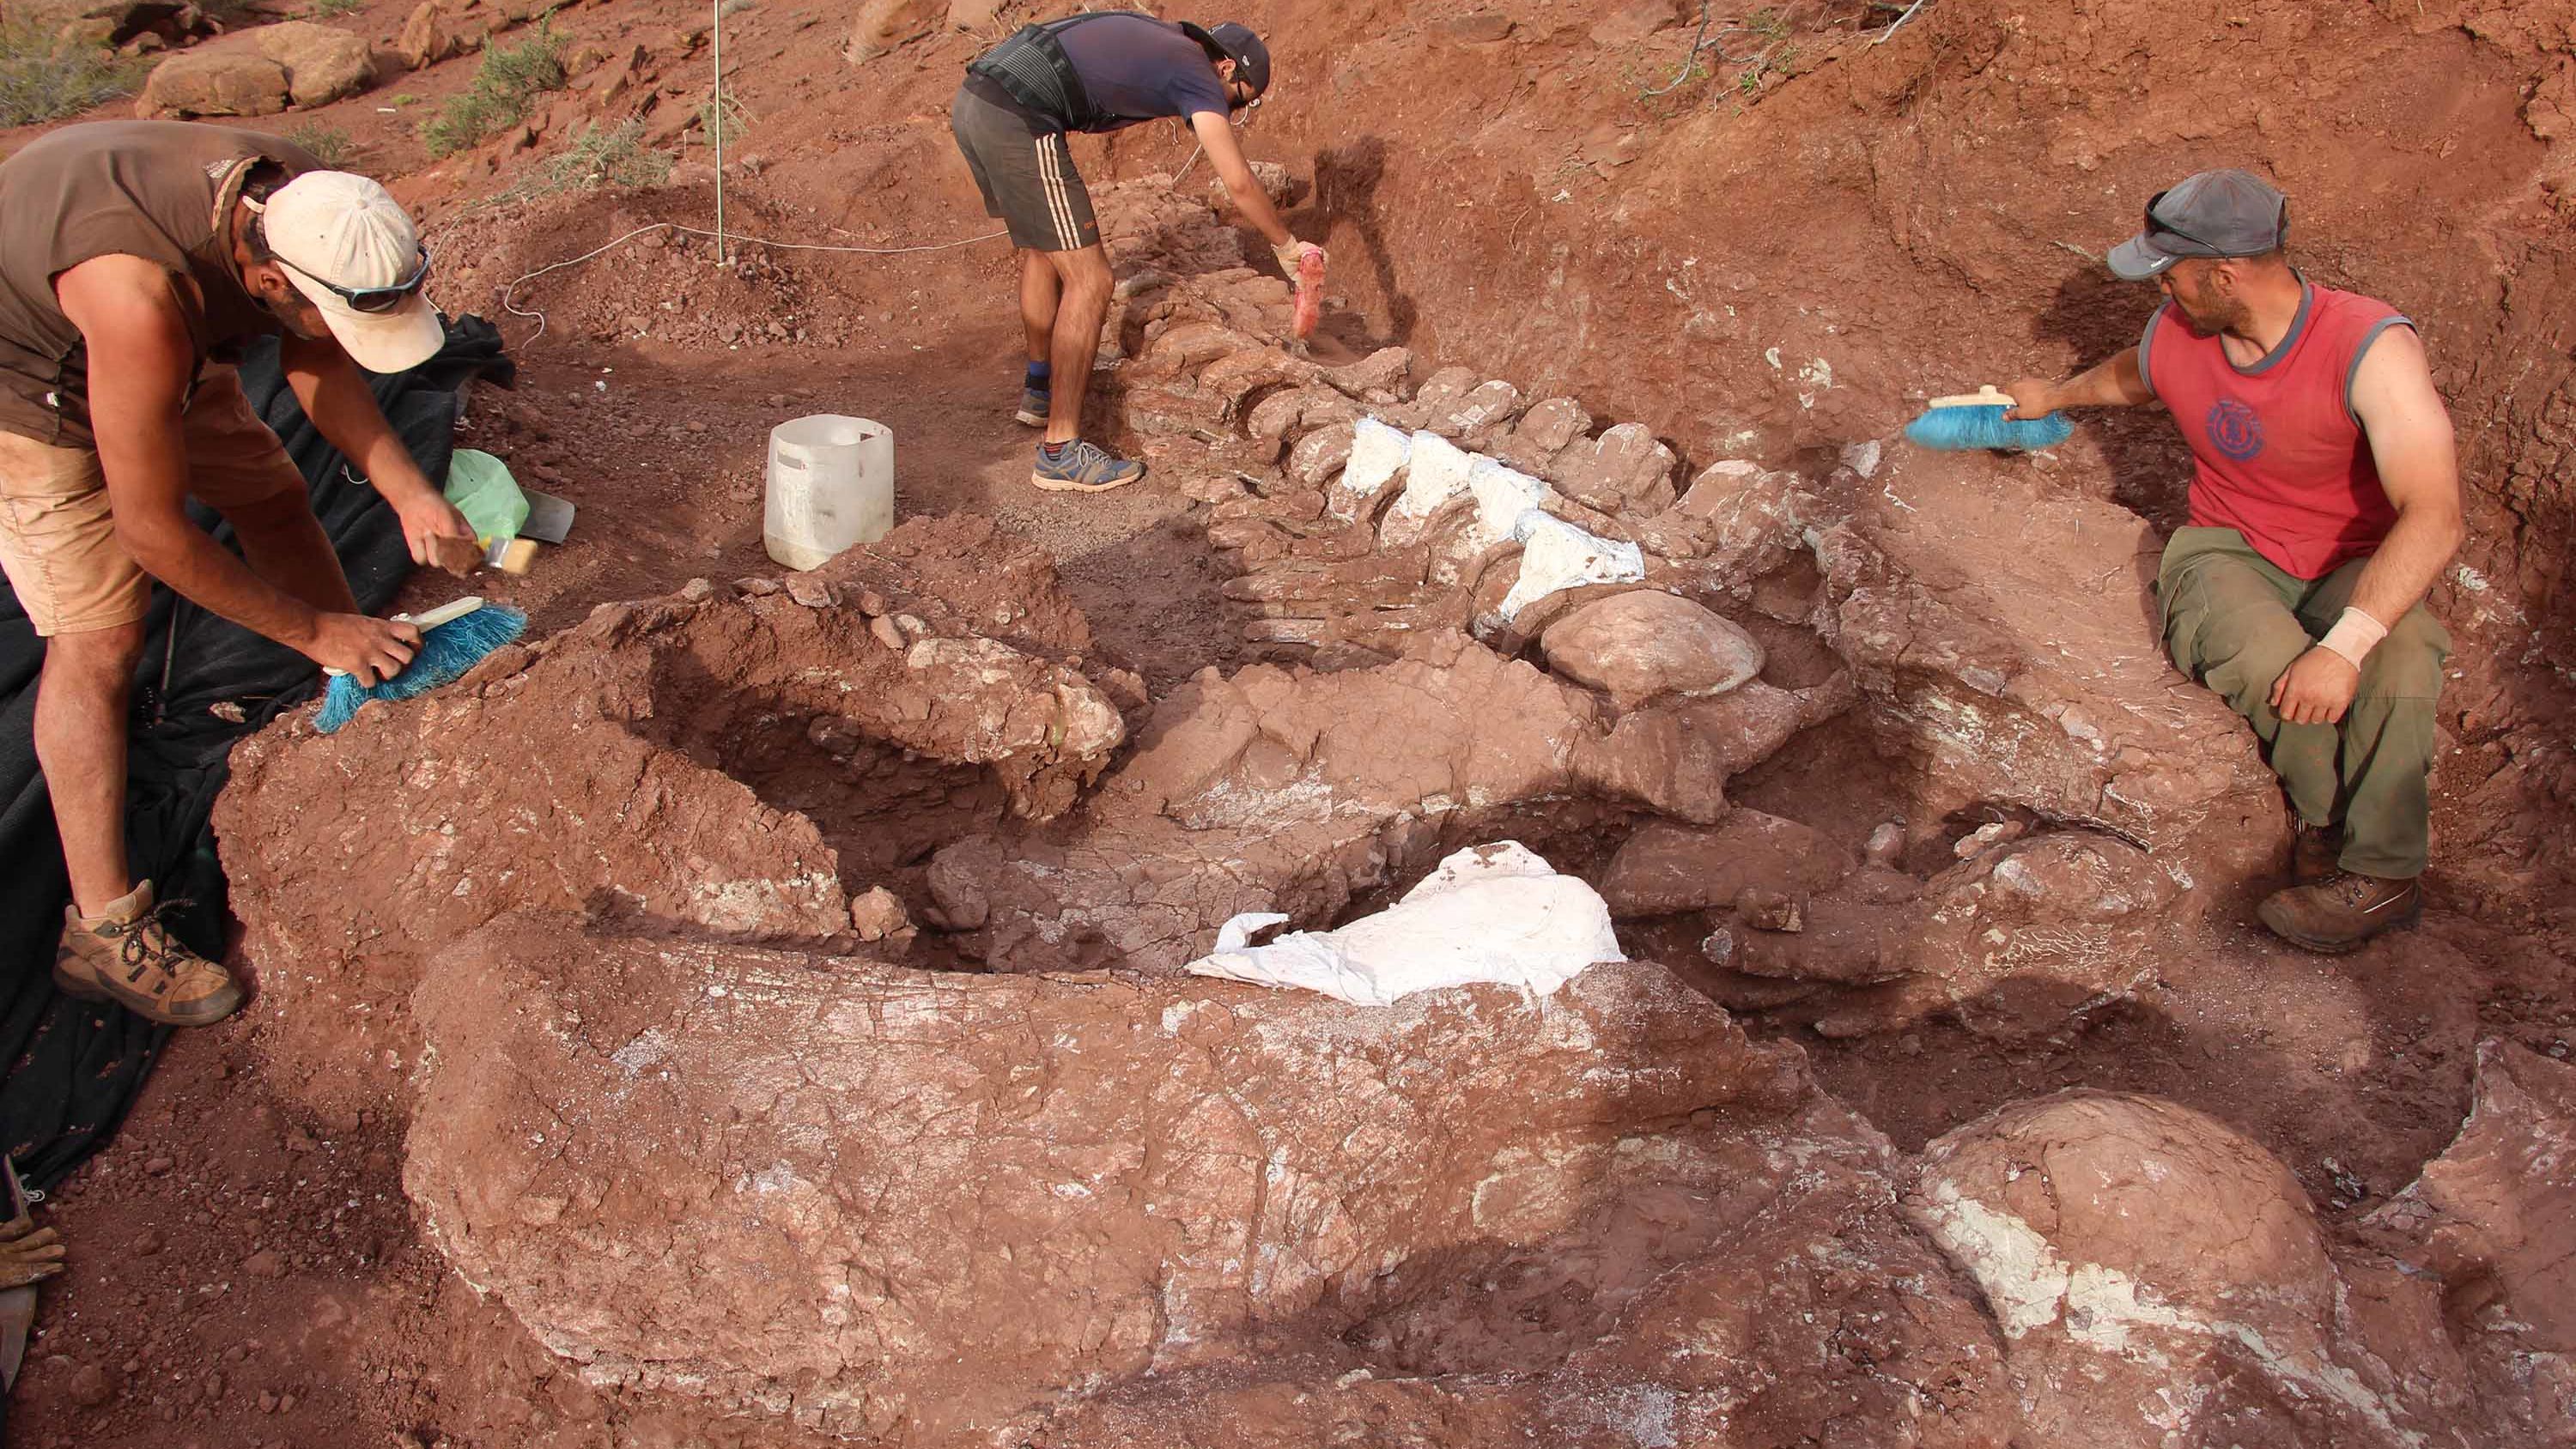 Paleontologists discovered the fossilized remains of a 98 million-year-old titanosaur in Neuquén Province in Argentina's northwest Patagonia.